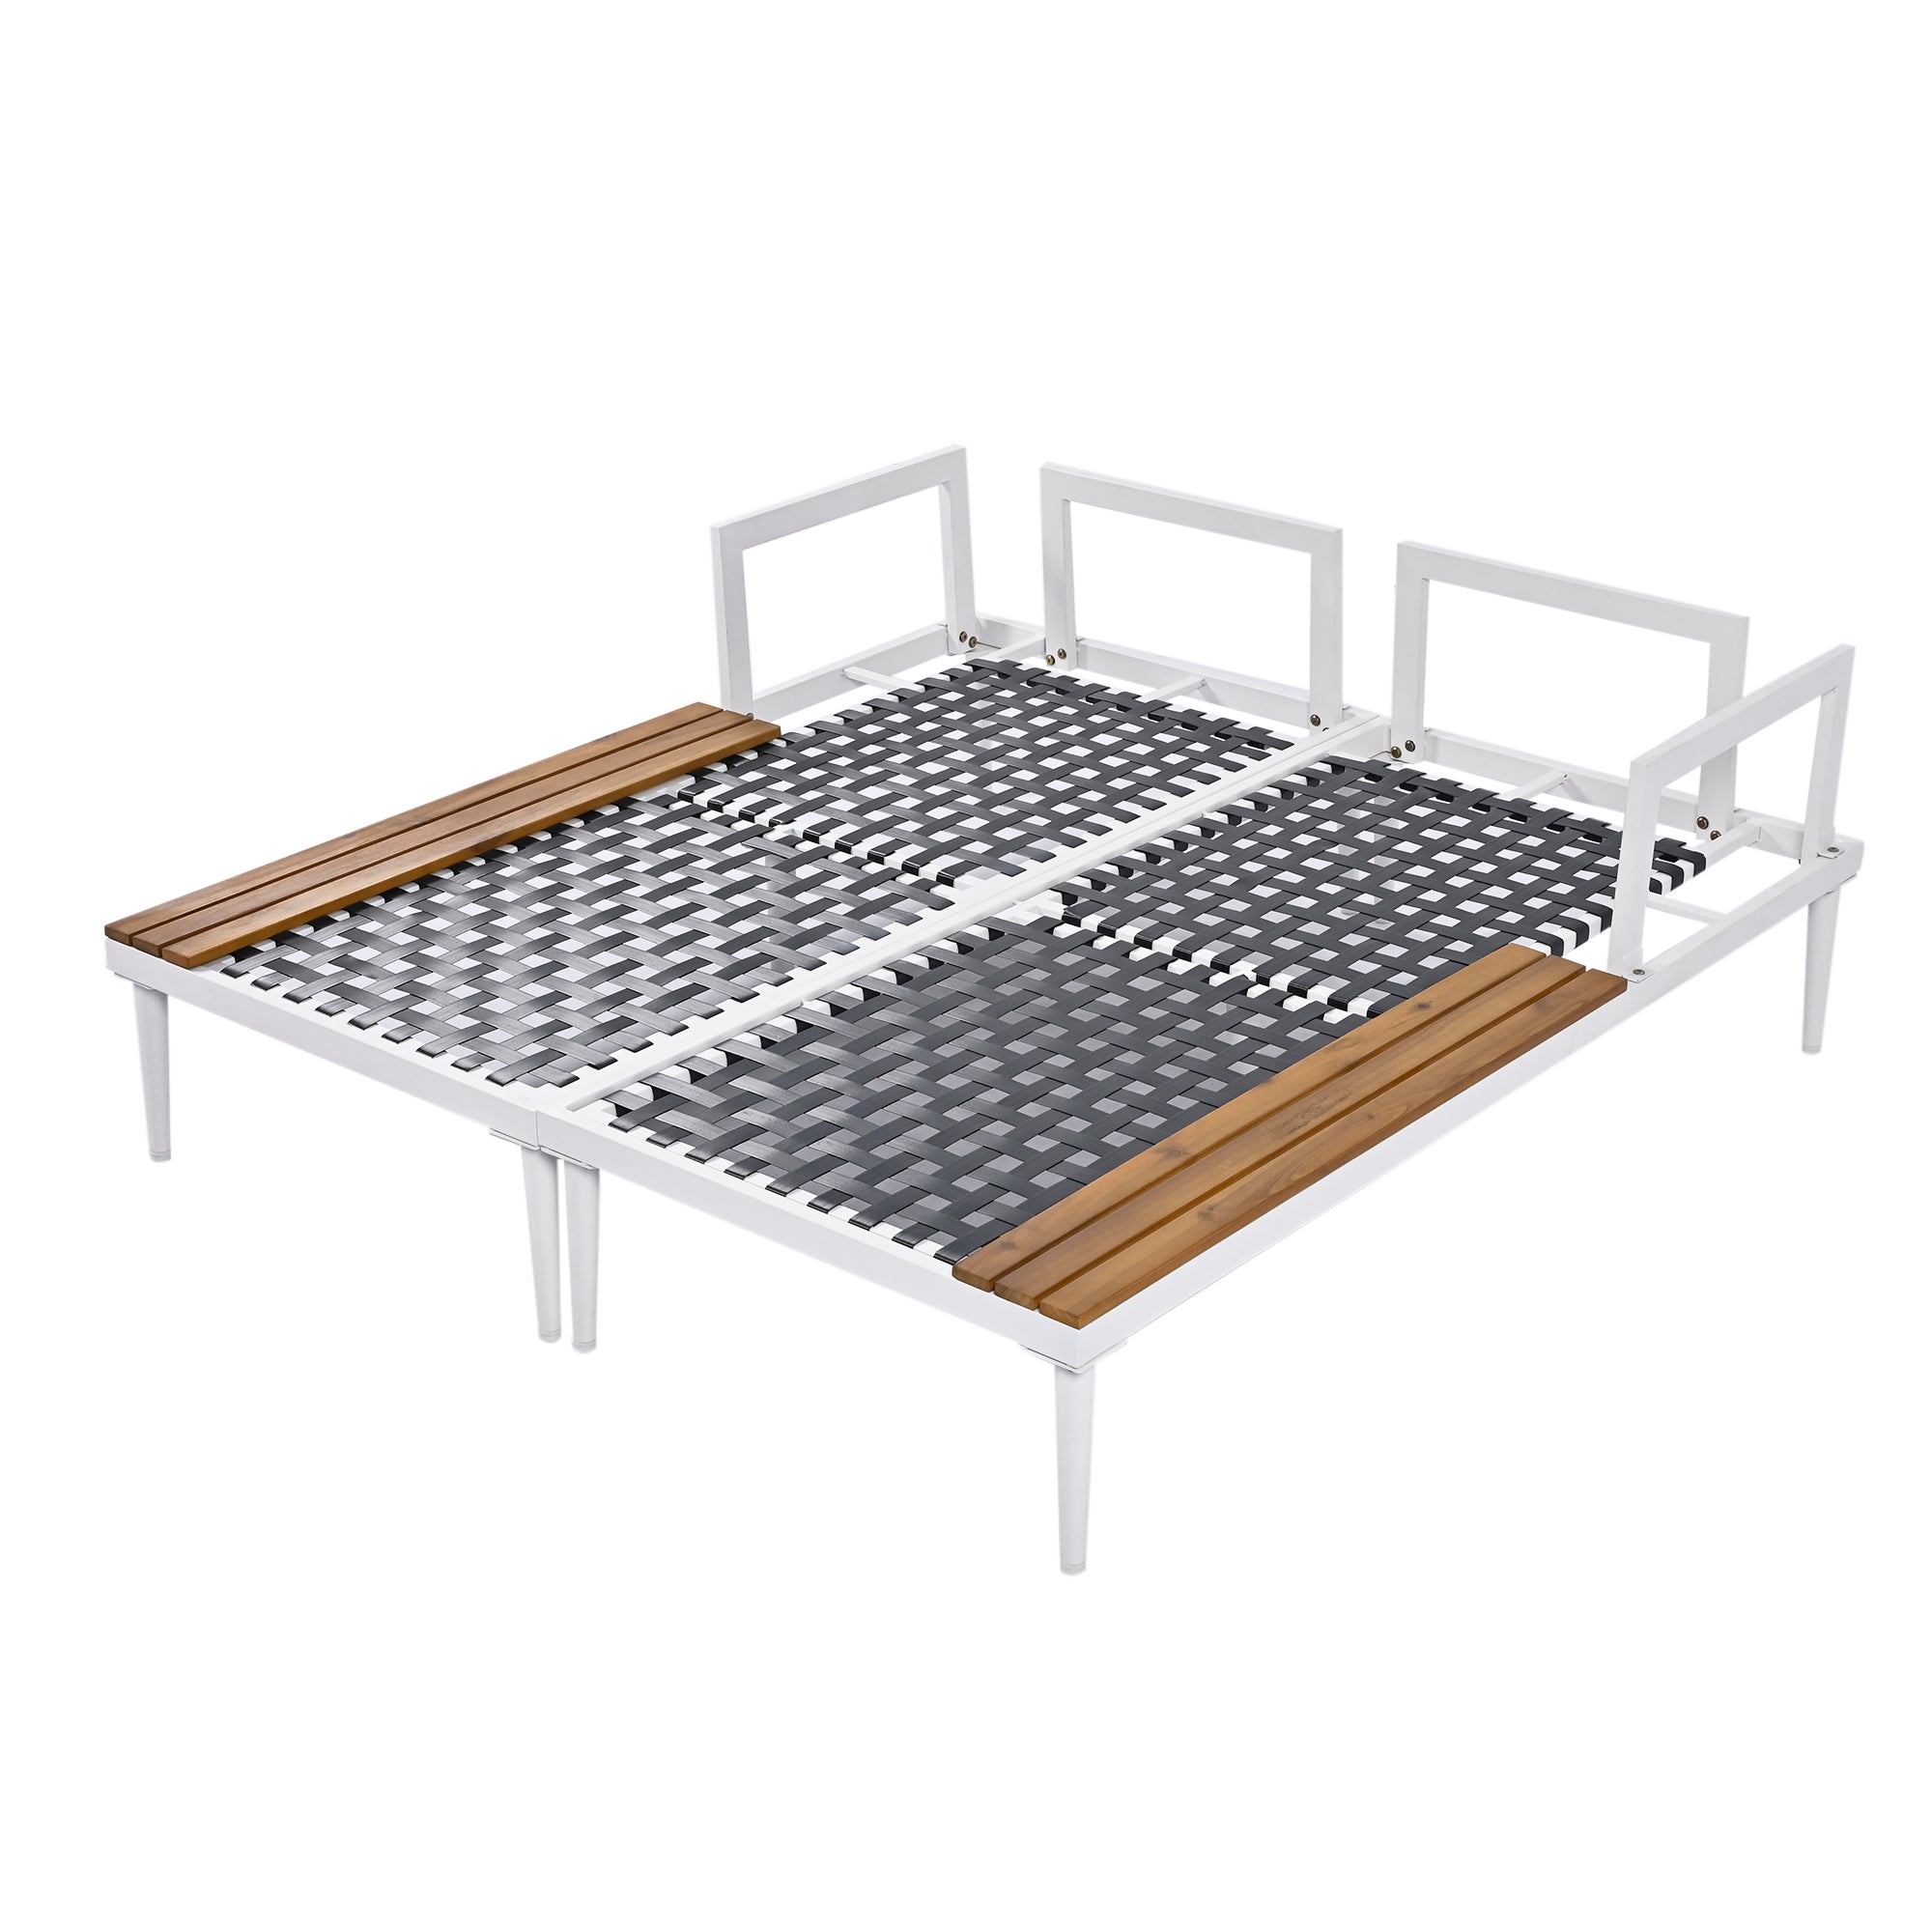 TOPMAX Modern Outdoor Daybed Patio Metal Daybed with Wood Topped Side Spaces for Drinks, 2 in 1 Padded Chaise Lounges for Poolside, Balcony, Deck, Beige